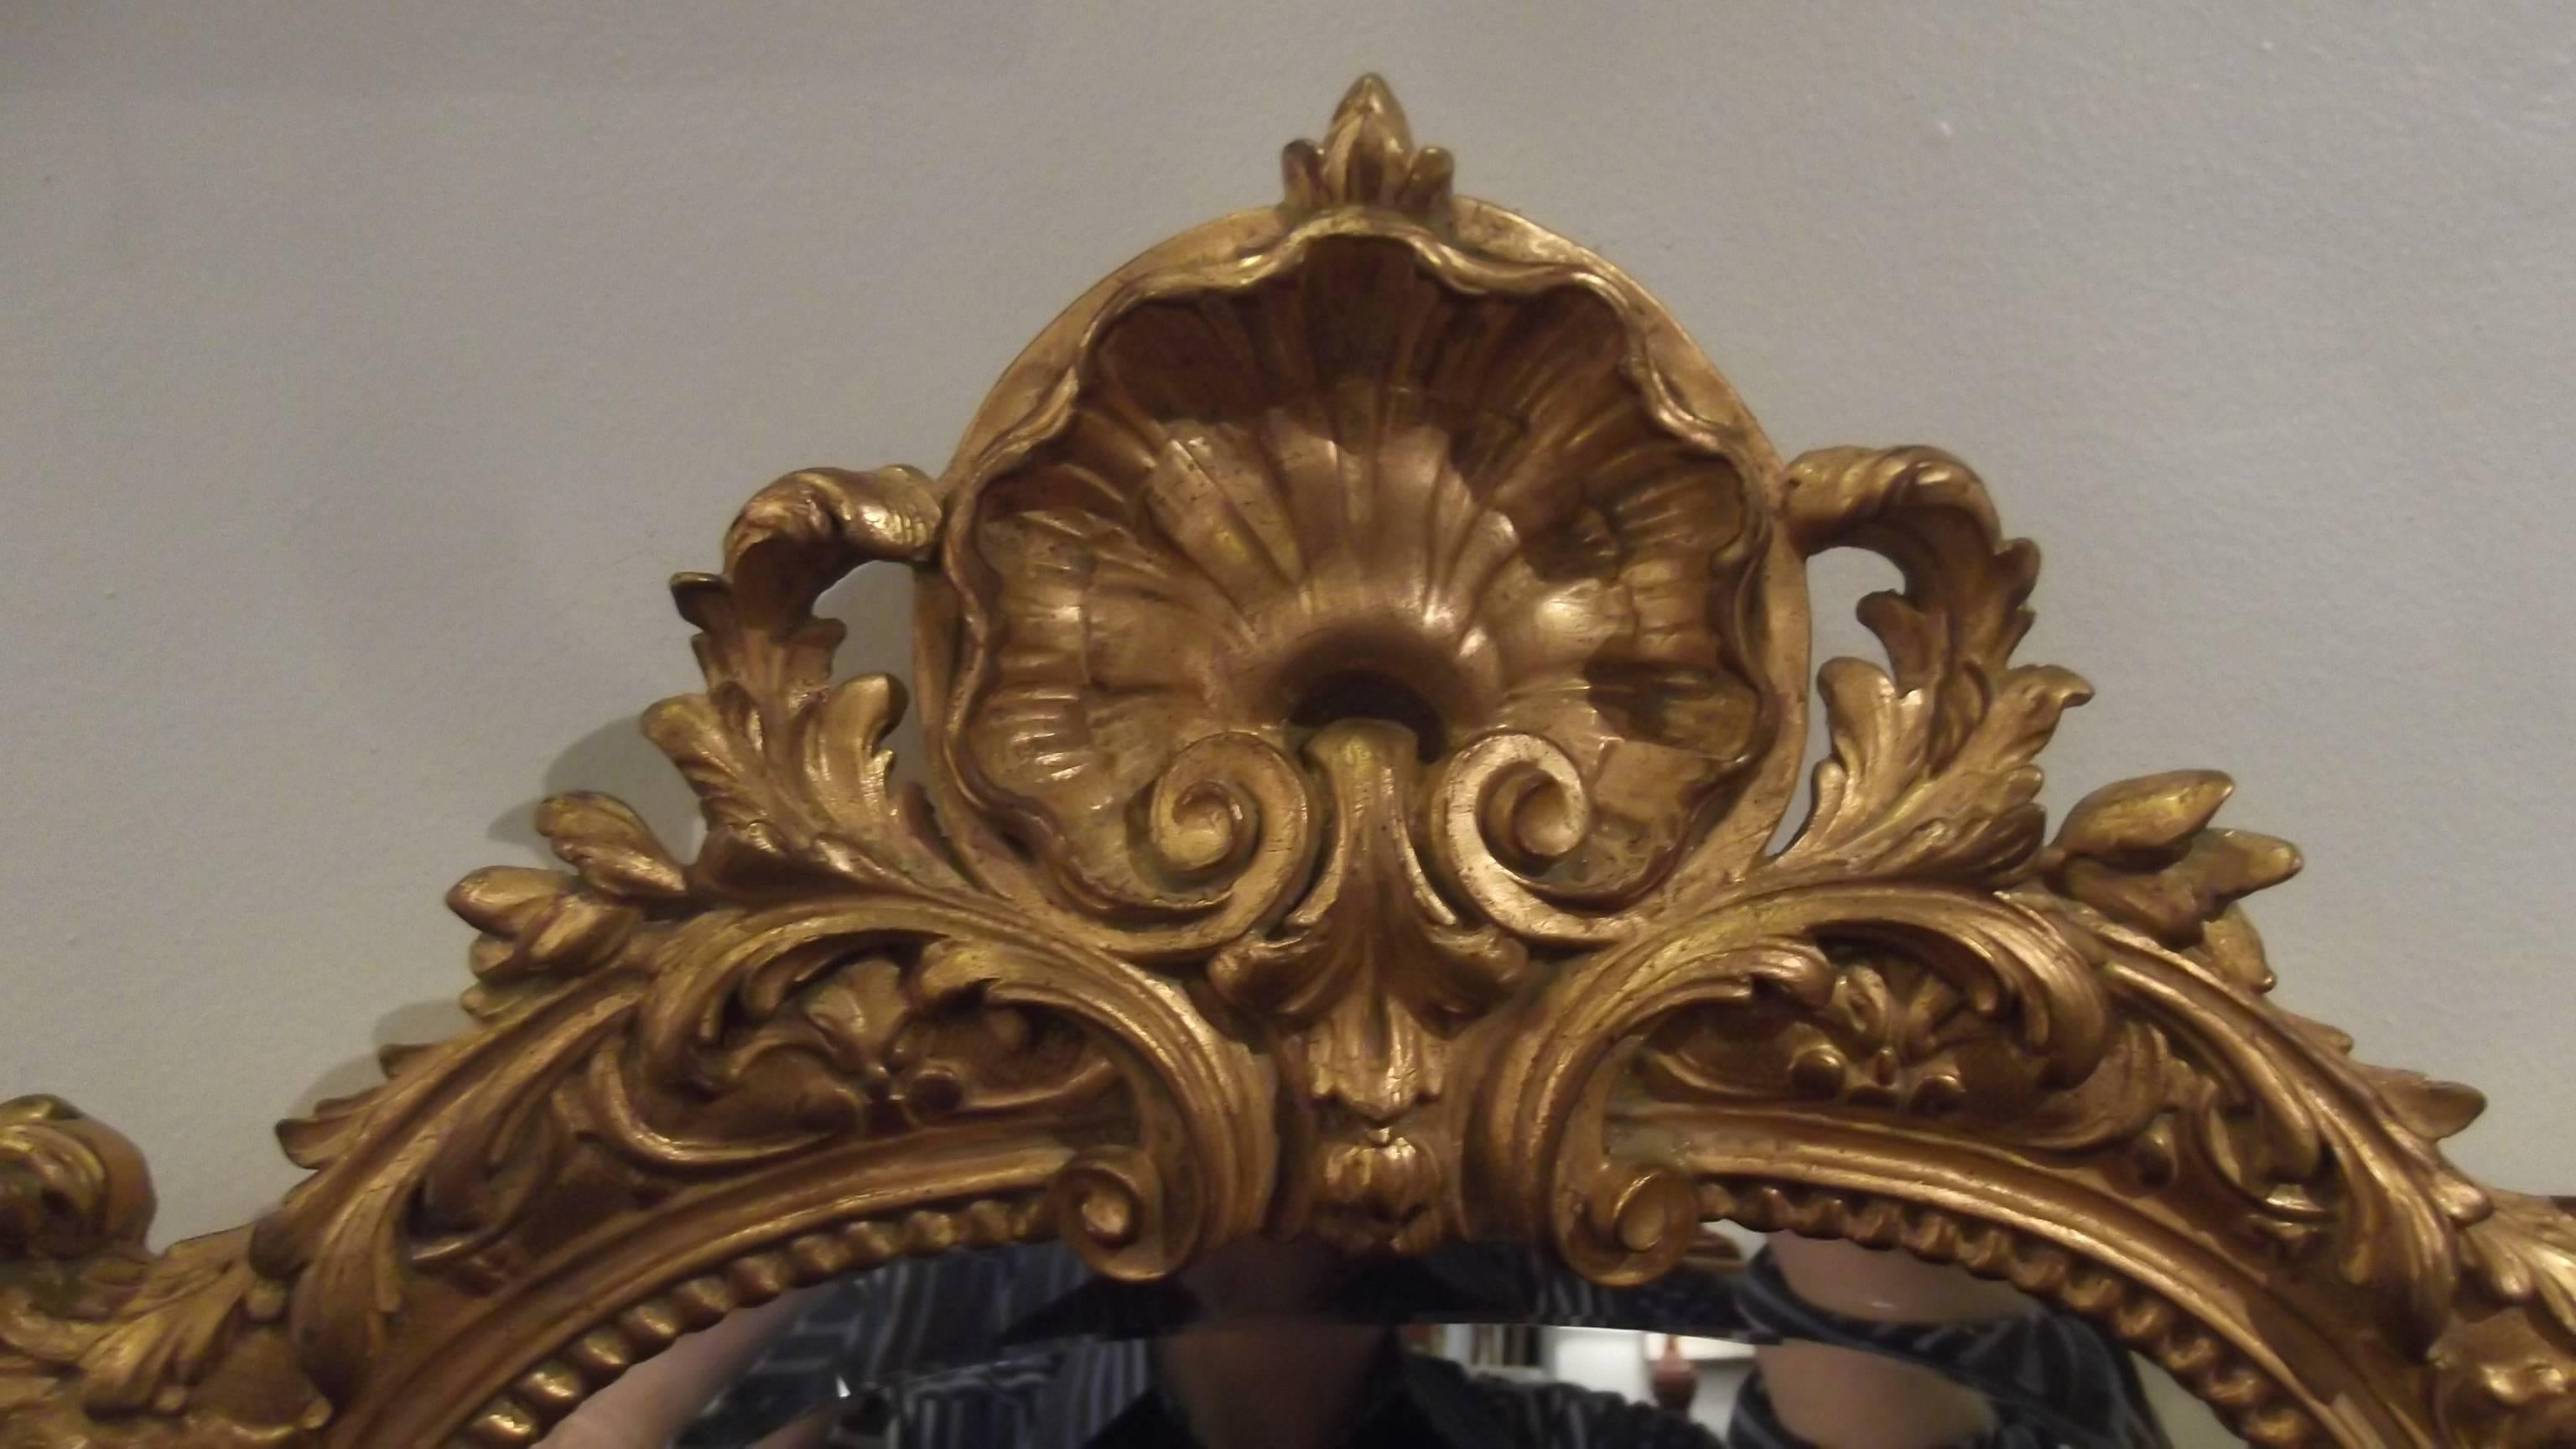 Beautiful Louis XV Style beveled mirror. Made by Carvers Guild, a high end American company
Styled after and original 18th century looking glass in a charming antique shop in Barbizon, France. This refined and delicately detailed frame with